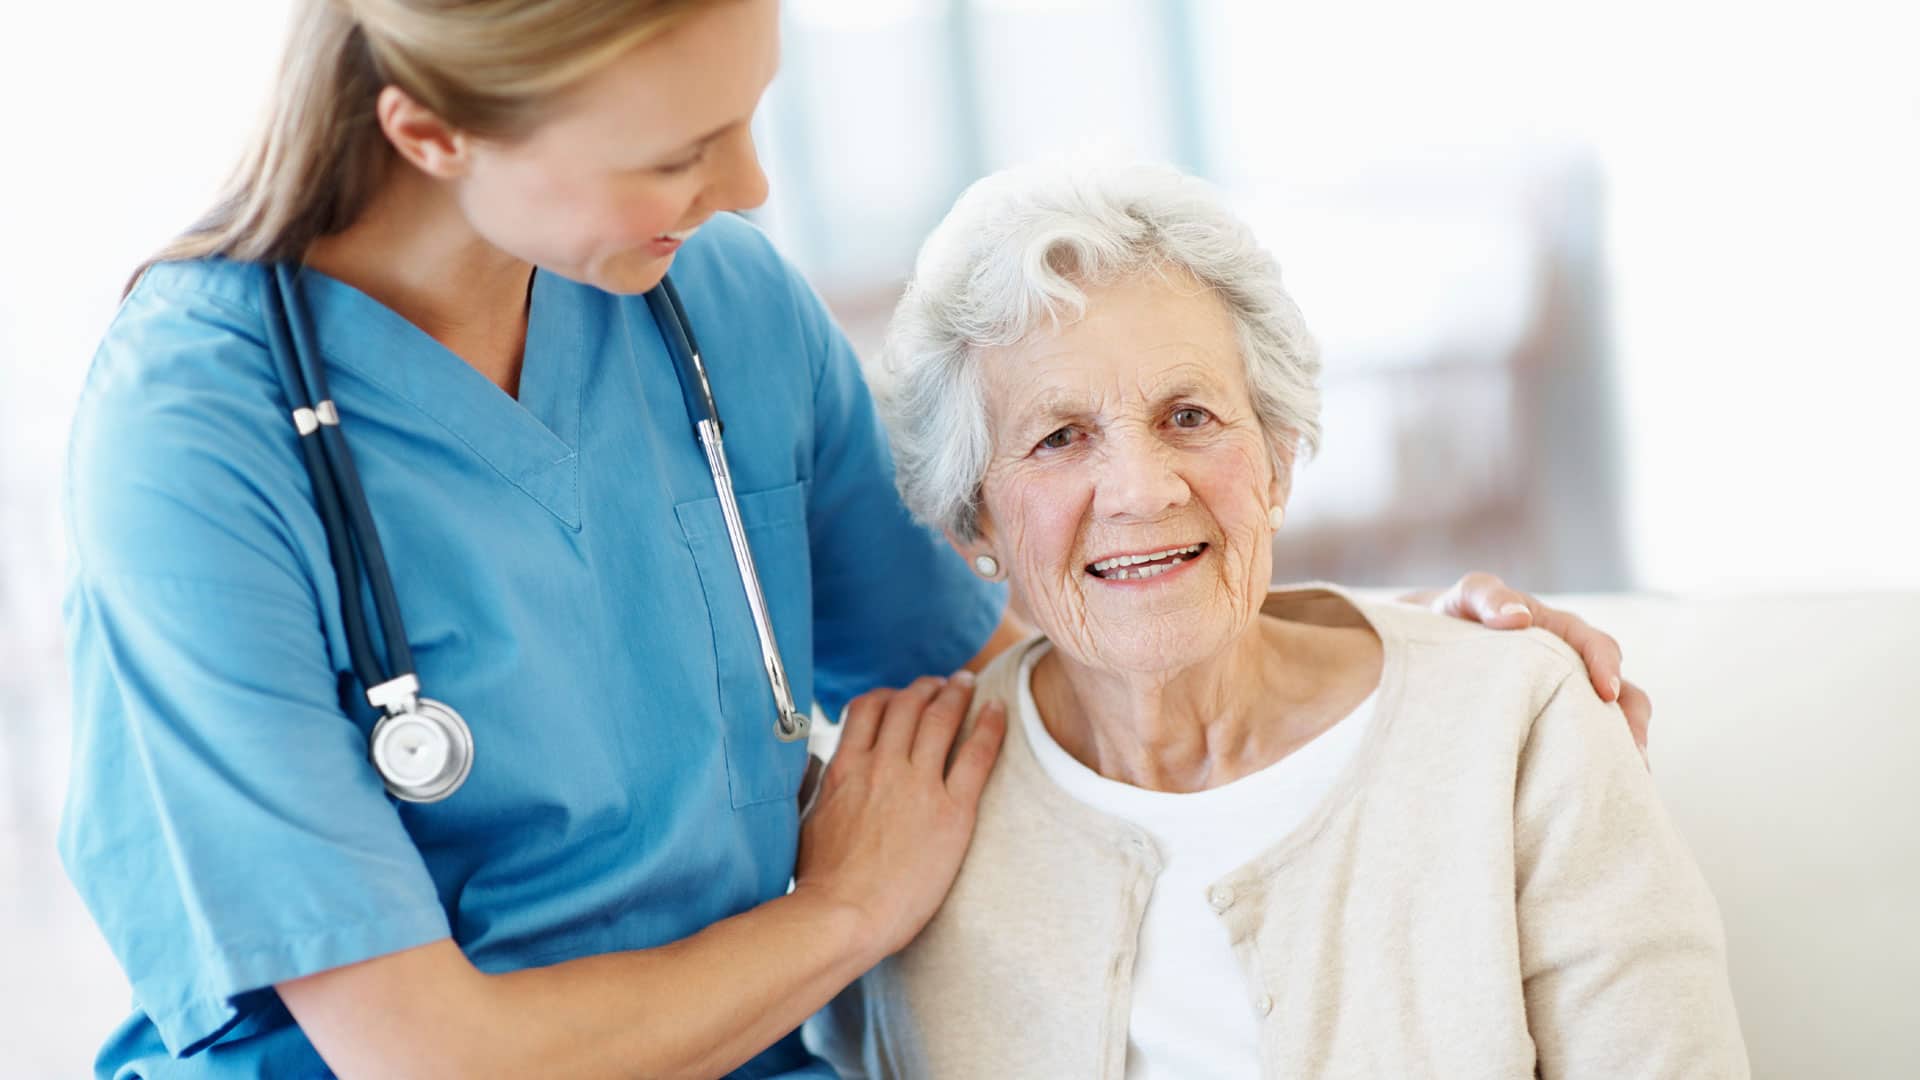 Quality dementia care for a senior resident with behavioral and psychological symptoms.